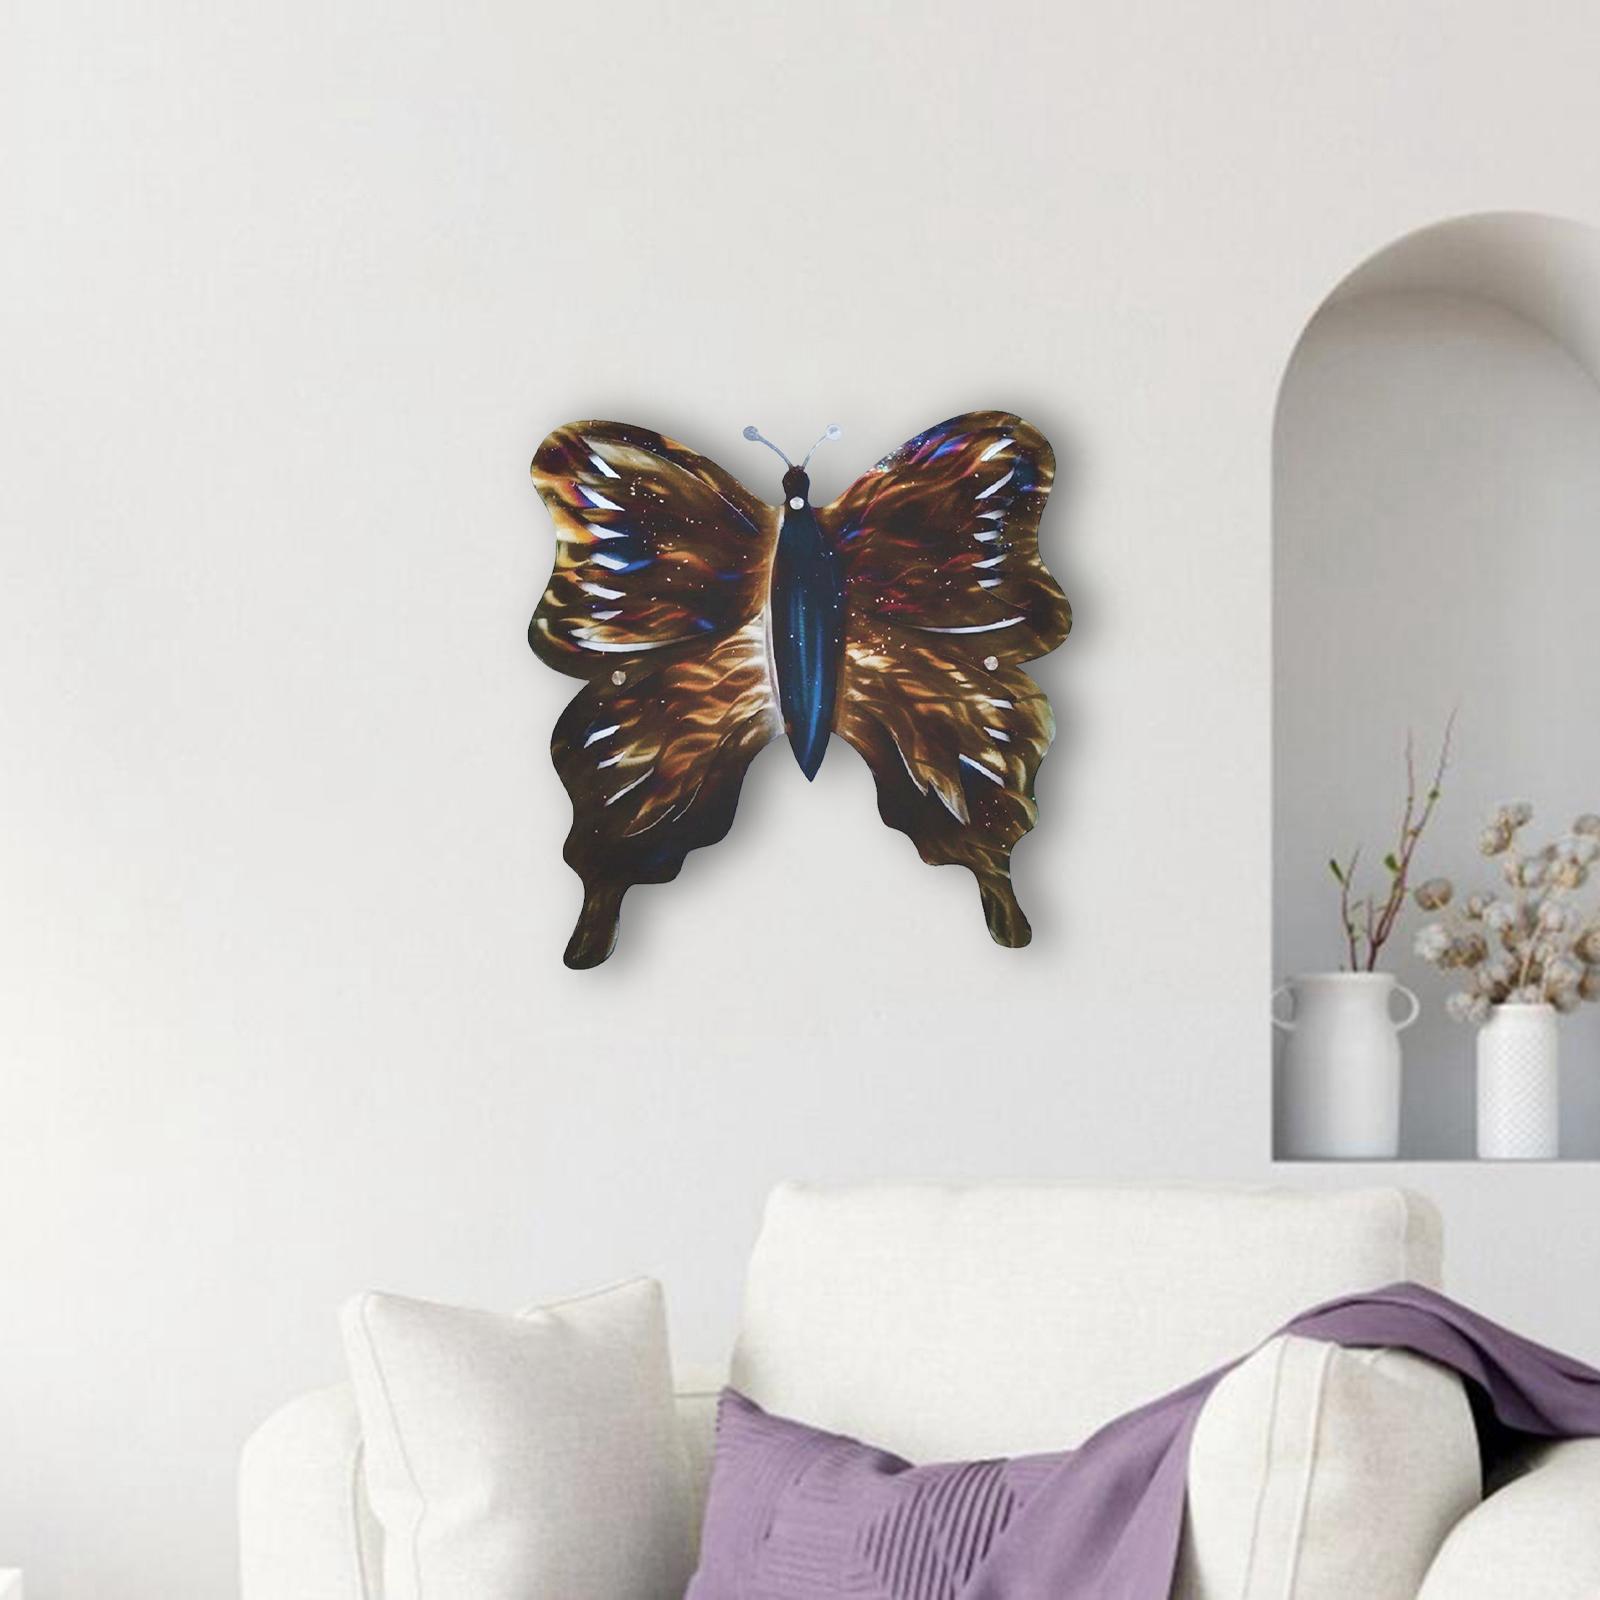 Modern Outdoor Butterfly Wall Sculptures for Home Living Room Decoration L